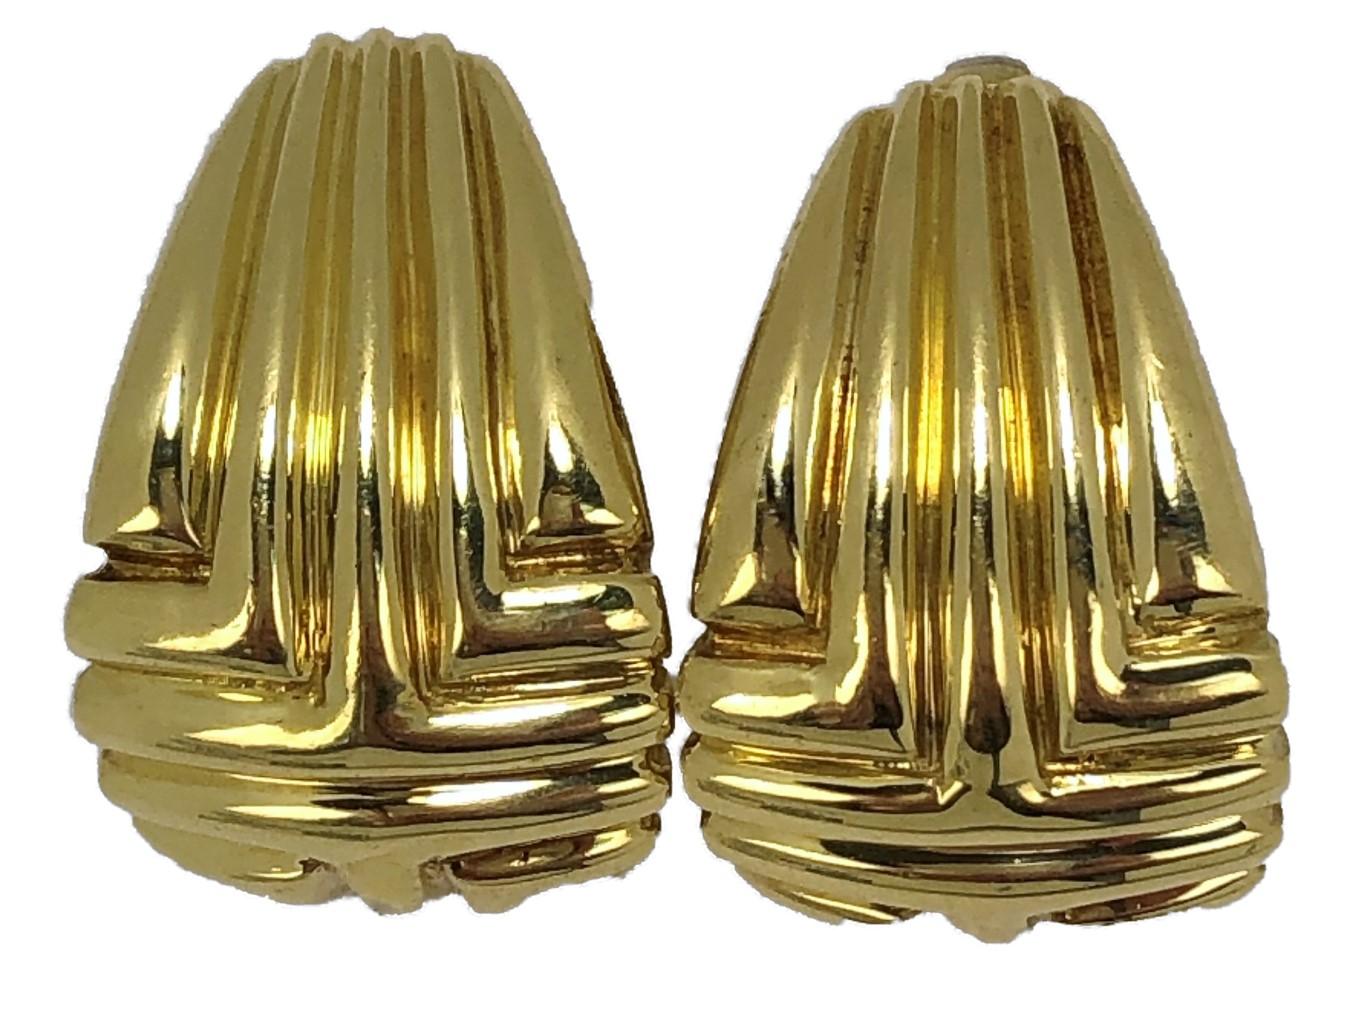 Classic Van Cleef & Arpels 18K yellow gold clip on 
earrings measuring 7/8 inch long by 11/16 inch wide. 
Marked 3 K 1392 VCA. Stamped 18K. Gross weight 
16.6 grams.